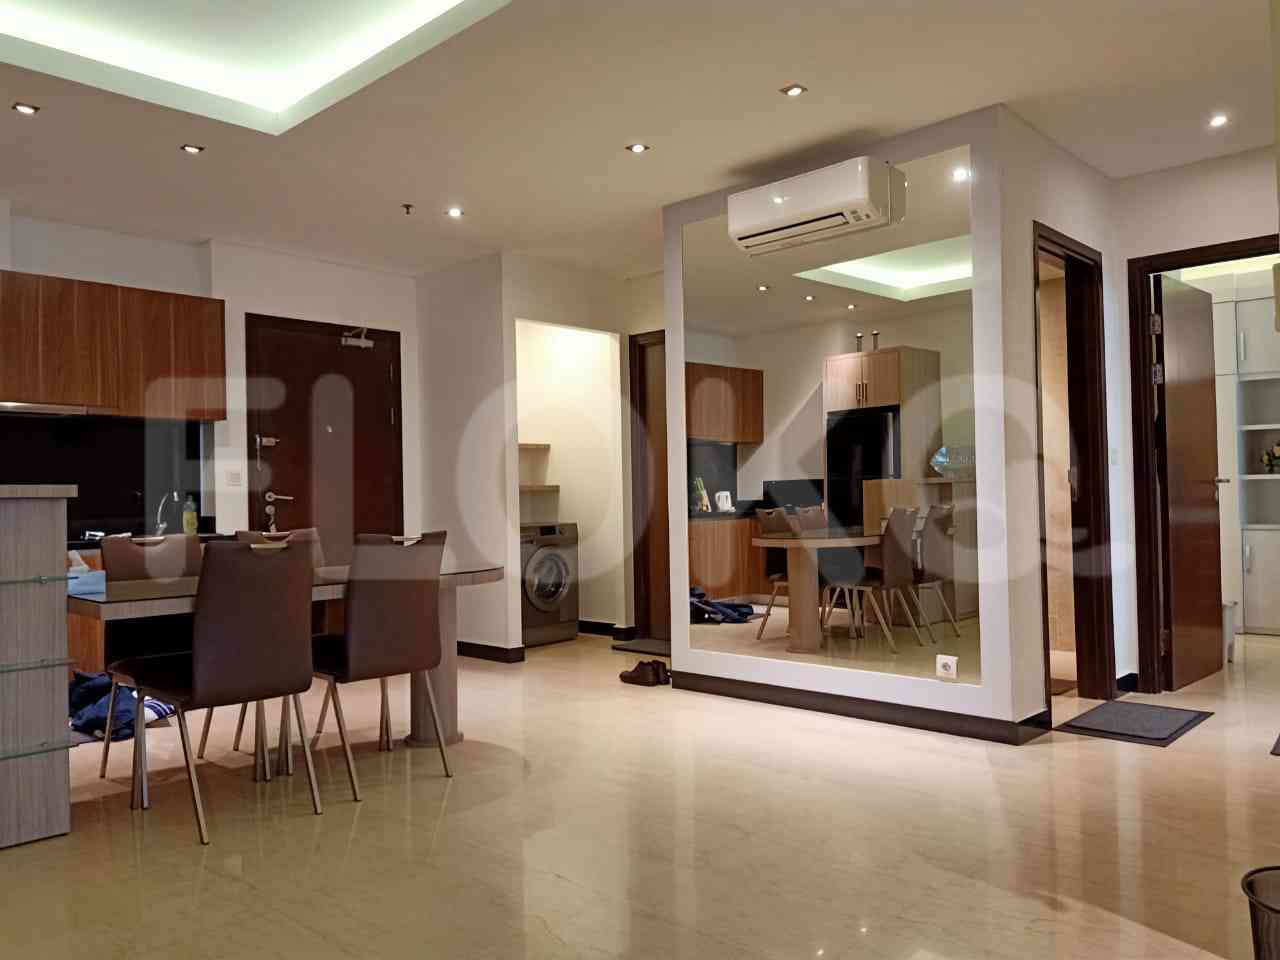 2 Bedroom on 25th Floor for Rent in Lavanue Apartment - fpa6a0 2